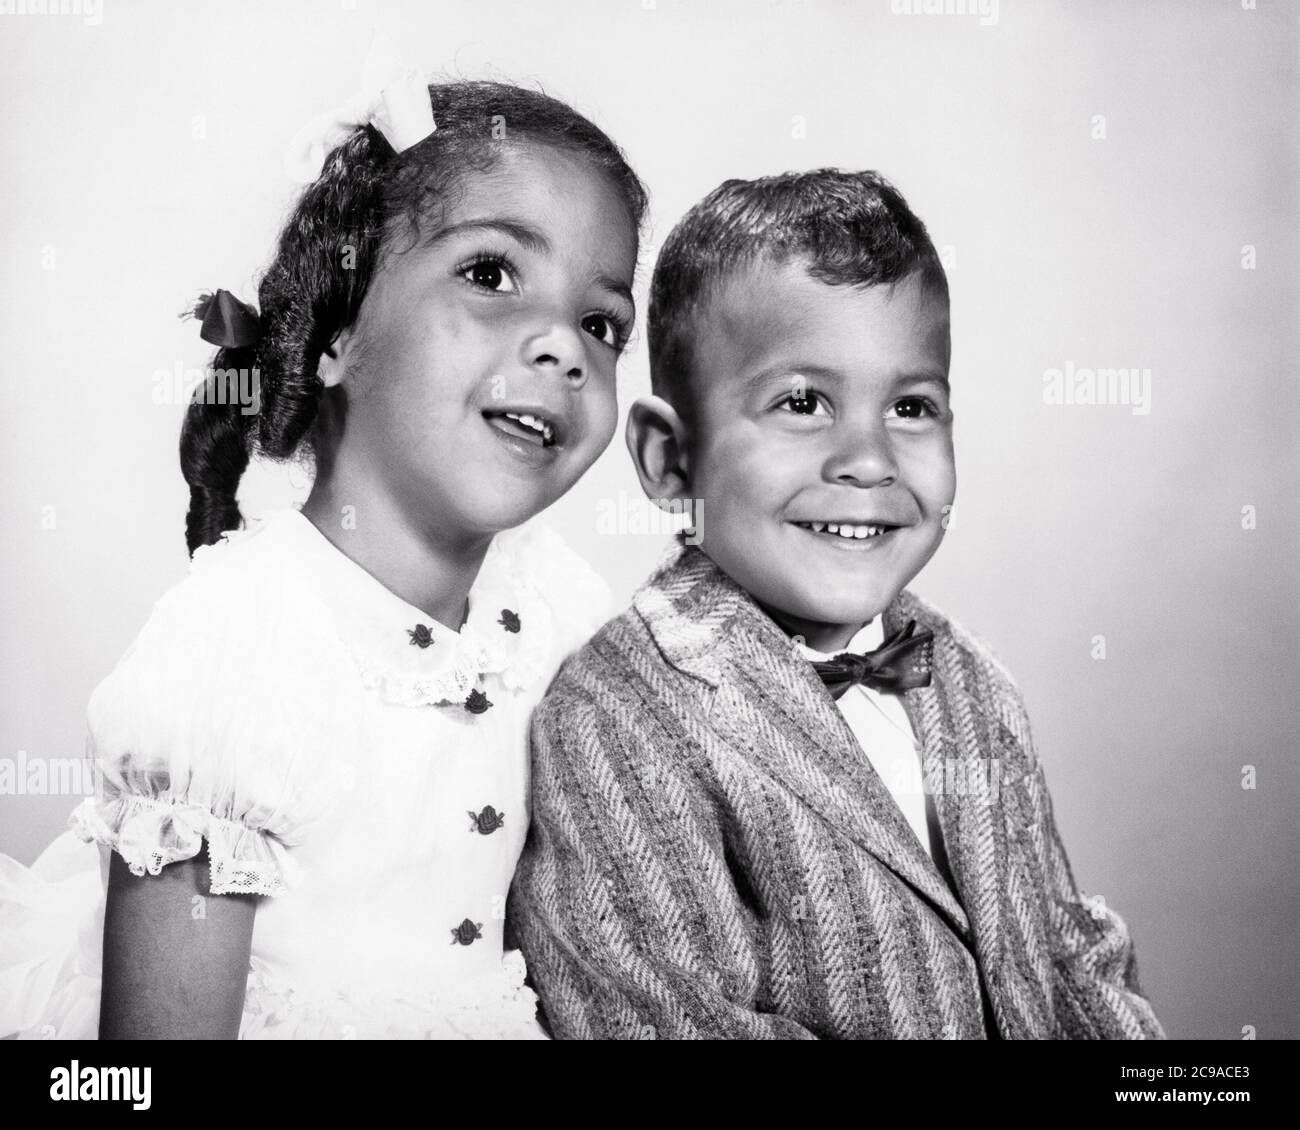 1960s PORTRAIT AFRICAN-AMERICAN BOY AND GIRL SITTING TOGETHER OLDER SISTER WHISPERING TO YOUNGER BROTHER  - n1753 HAR001 HARS STRONG JOY LIFESTYLE CELEBRATION FEMALES BROTHERS STUDIO SHOT HEALTHINESS HOME LIFE COPY SPACE FRIENDSHIP HALF-LENGTH CARING MALES SIBLINGS CONFIDENCE SISTERS EXPRESSIONS B&W HAPPINESS WELLNESS STRENGTH AFRICAN-AMERICANS AFRICAN-AMERICAN AND BLACK ETHNICITY PRIDE TO SIBLING CONNECTION STYLISH PERSONAL ATTACHMENT AFFECTION COOPERATION EMOTION GROWTH JUVENILES TOGETHERNESS YOUNGER BLACK AND WHITE HAR001 OLD FASHIONED AFRICAN AMERICANS Stock Photo